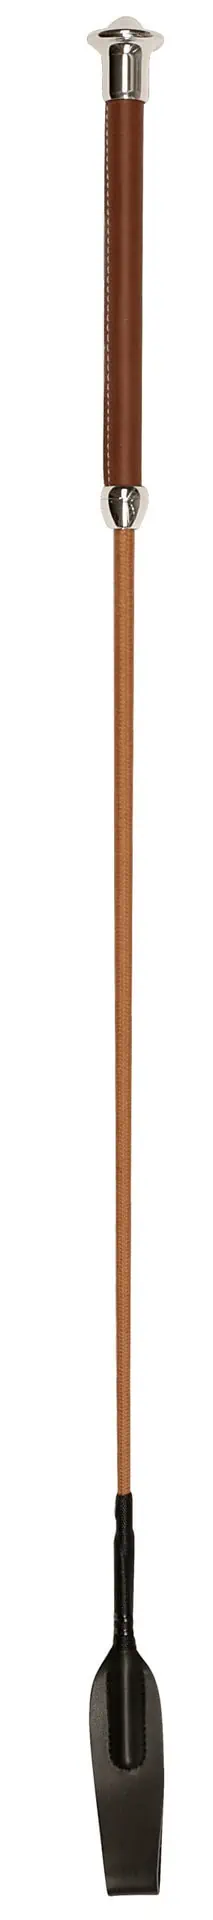 Jumping whip cognac, 65cm with synthetic leather handle